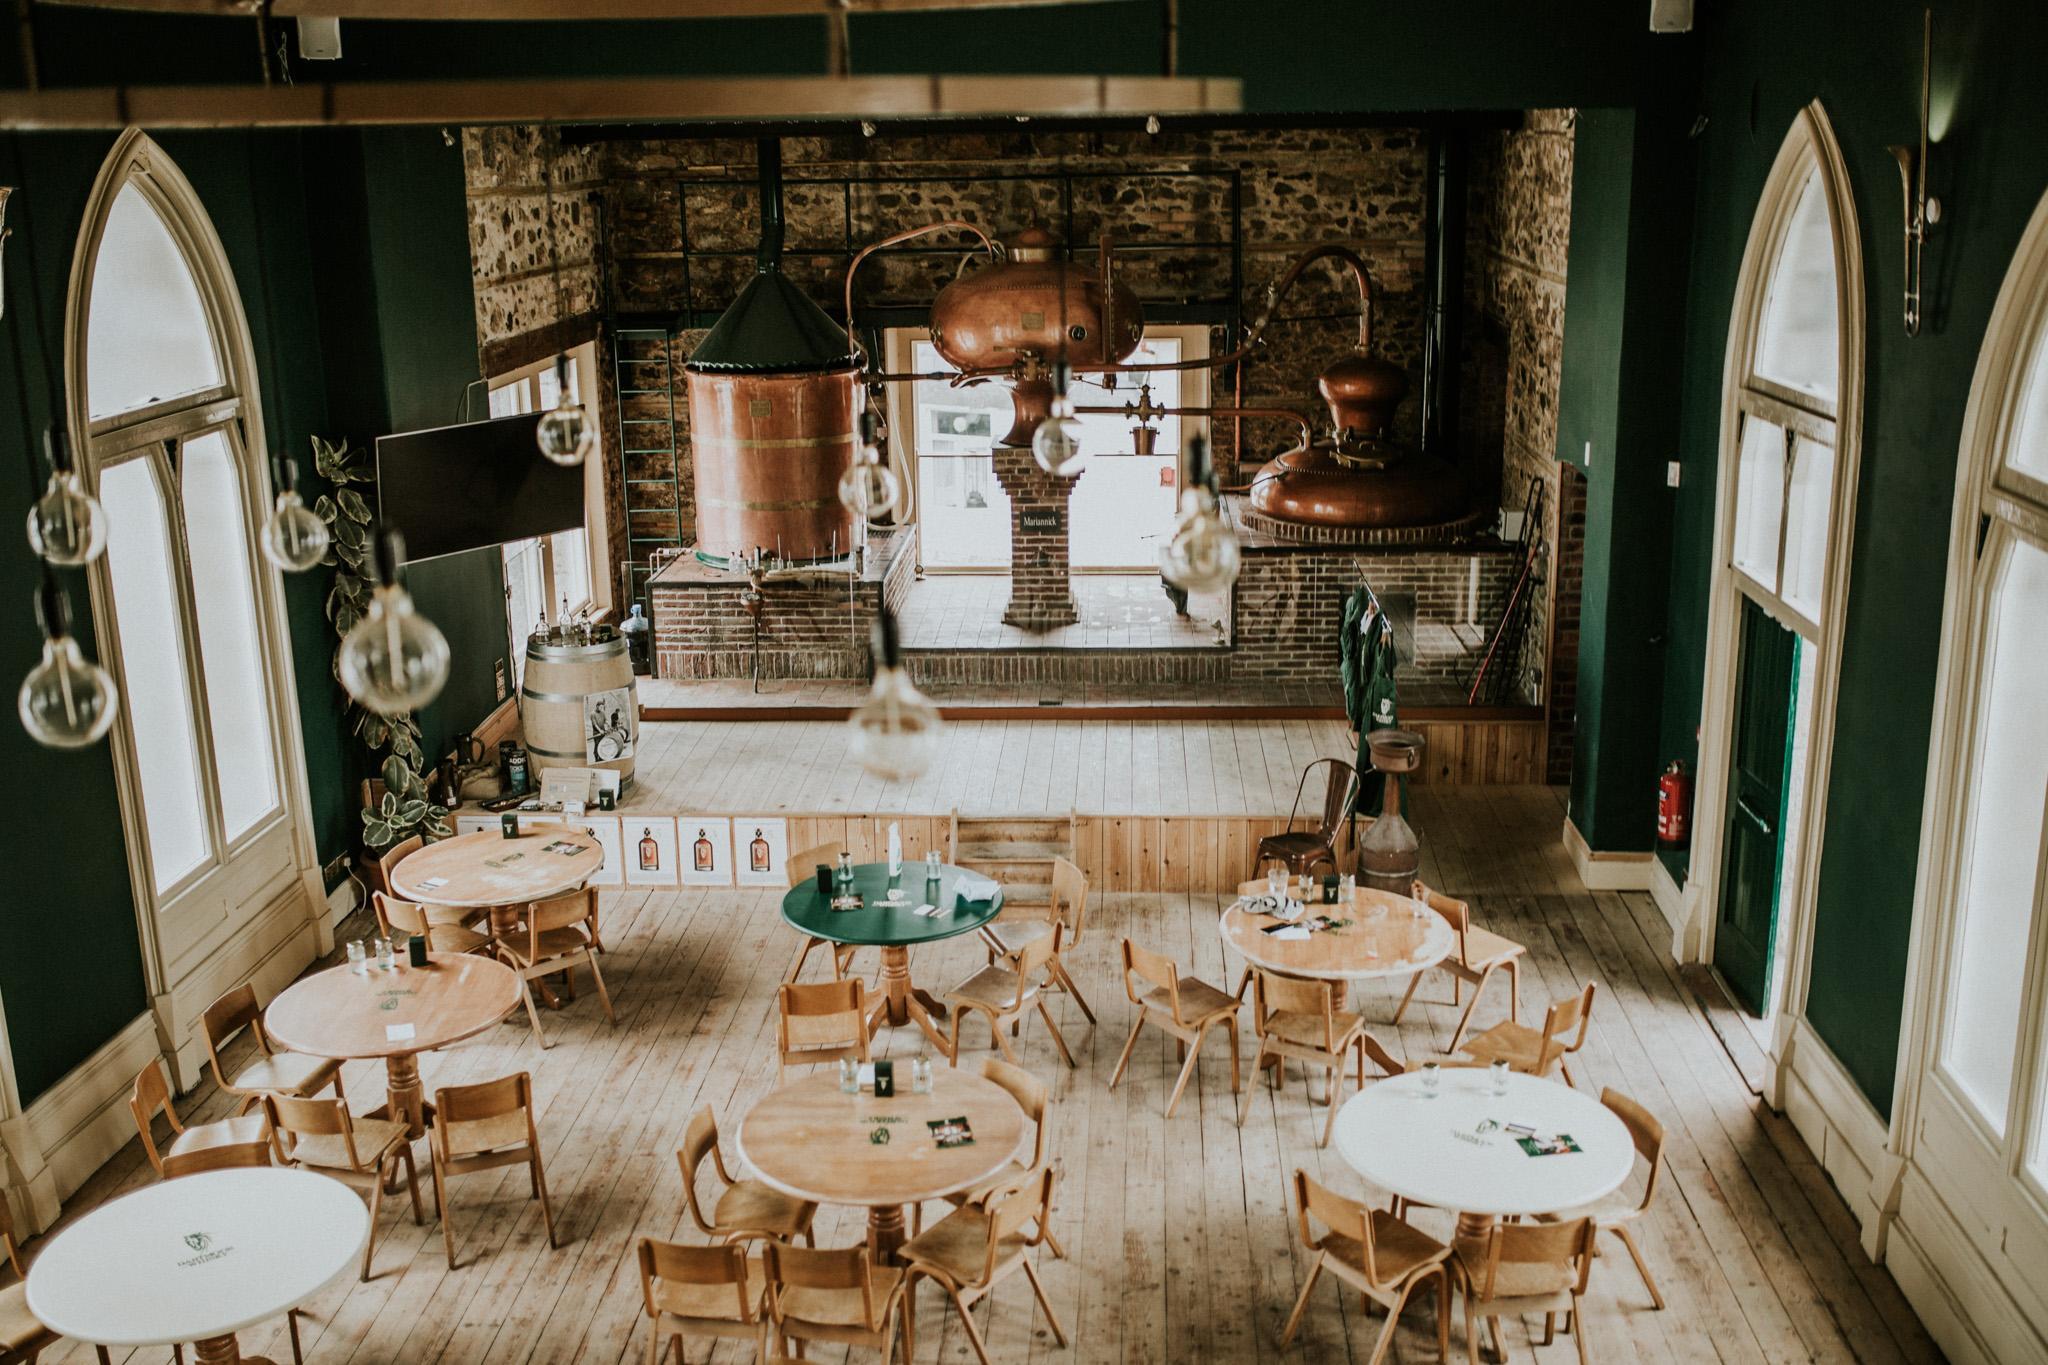 Dartmoor Whisky Distillery is based inside a historic building with communal seating in a rustic setting.